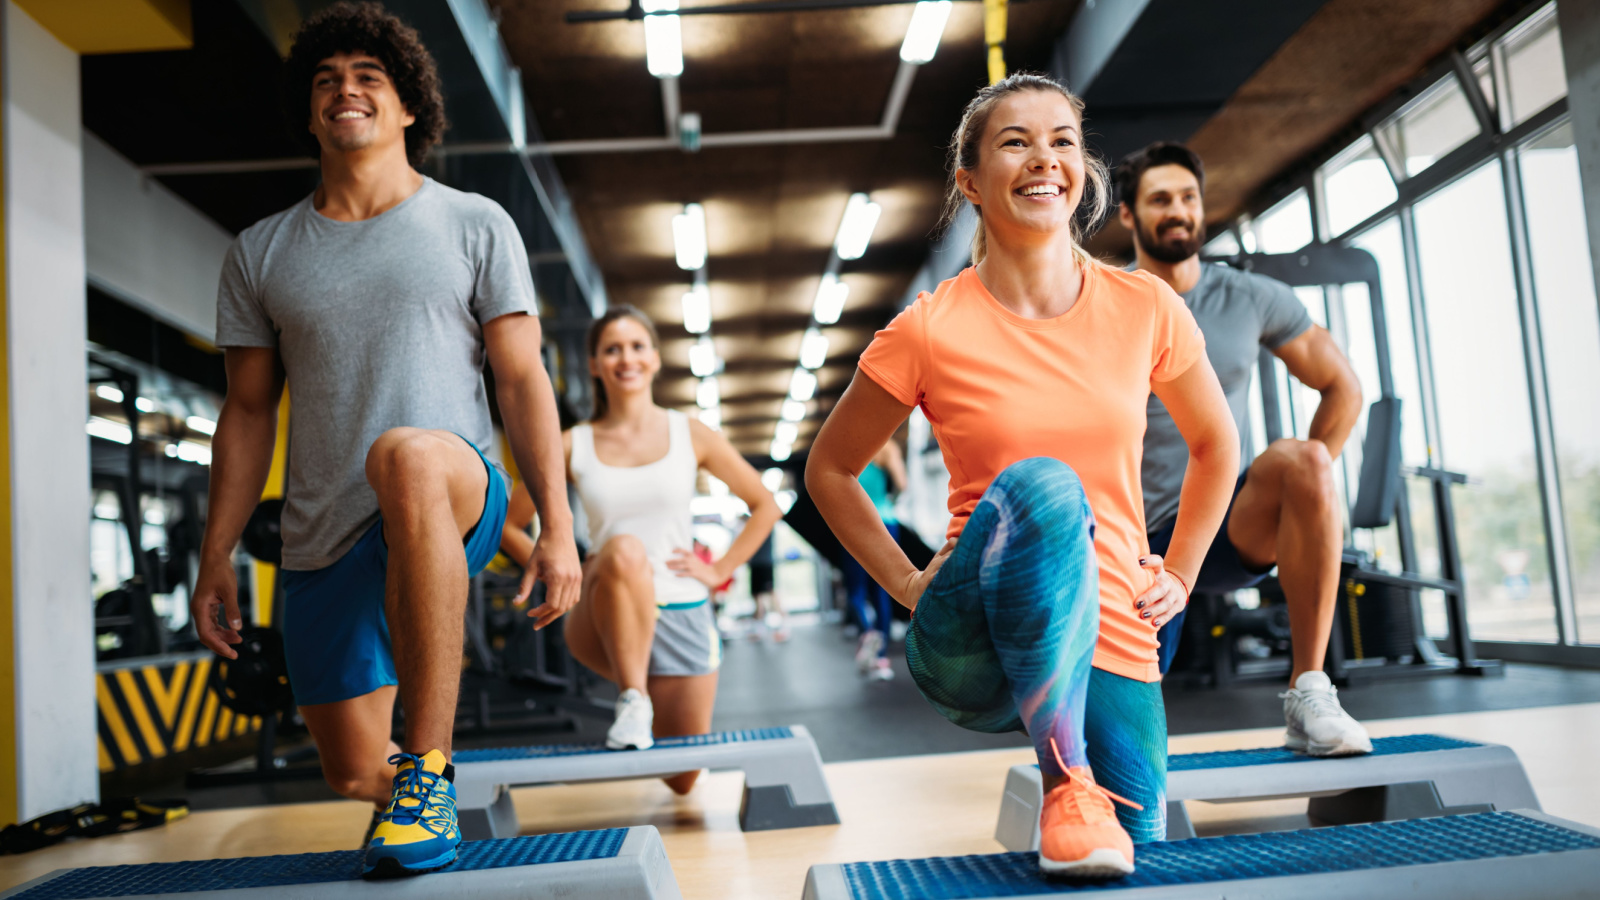 image credit: NDAB-Creativity/Shutterstock <p>Daily physical activity can promote better sleep, especially if done in the morning or afternoon. Avoid intense workouts close to bedtime, as they may increase your energy levels. A moderate amount of exercise can help you feel more tired at bedtime. As fitrunner12 notes, “Morning runs not only boost my mood but also lead to deeper sleep.”</p>